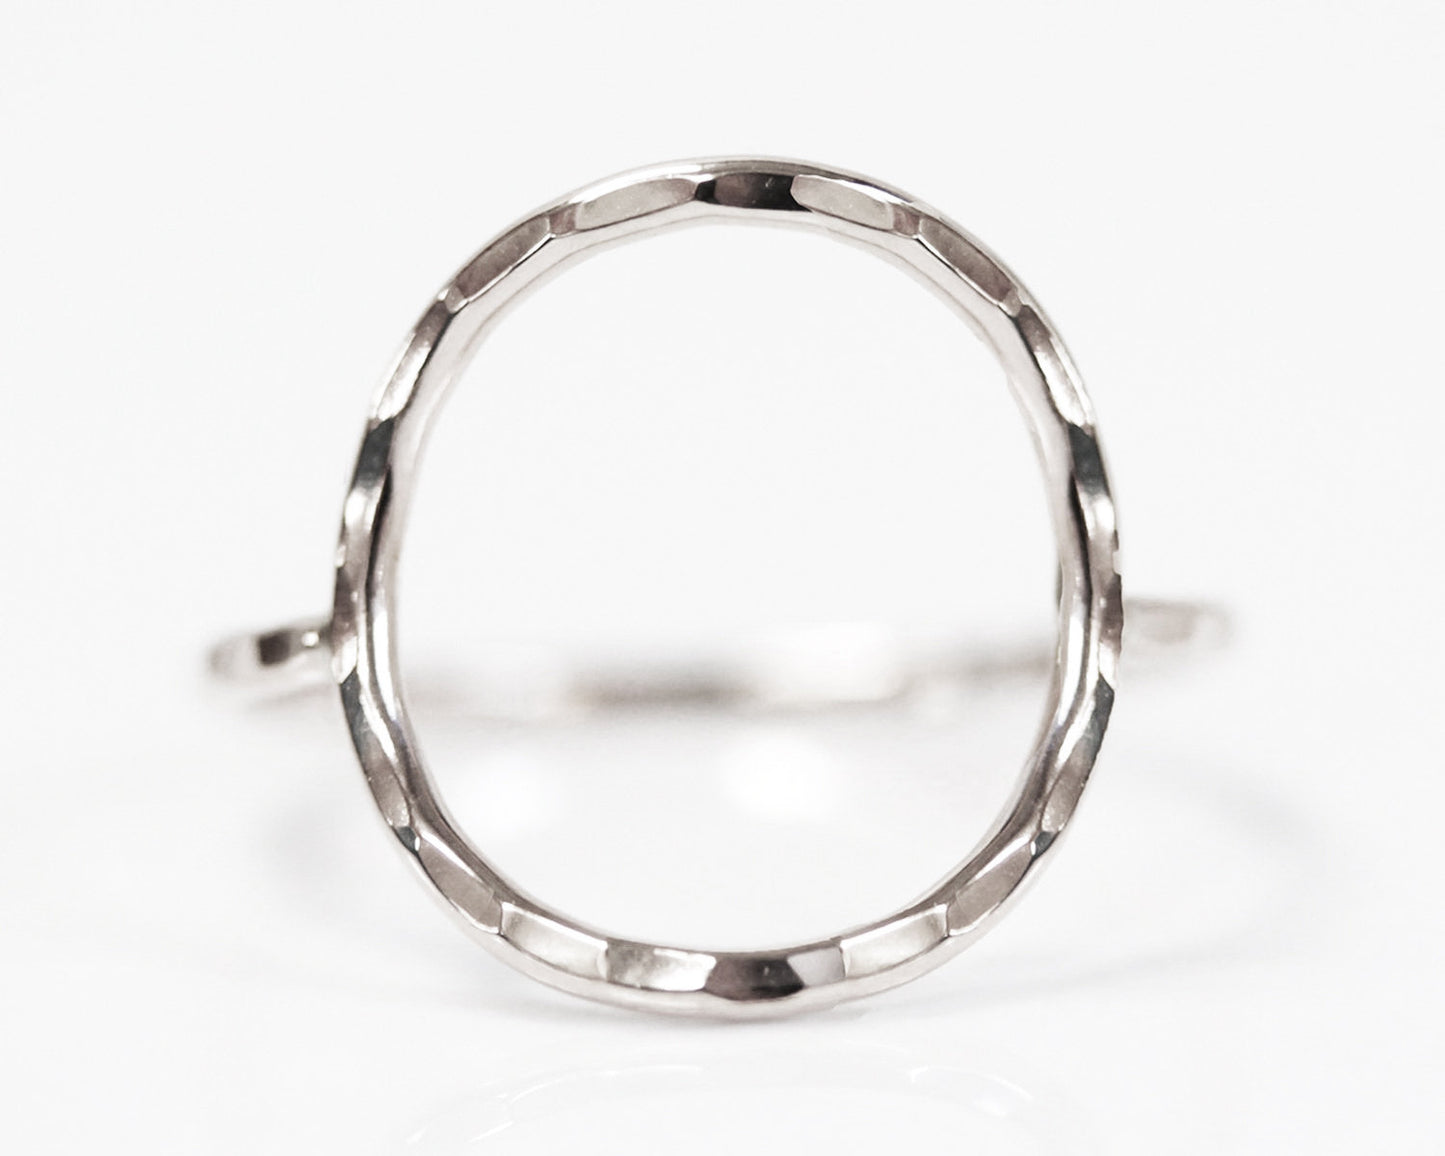 The Simple Circle Ring